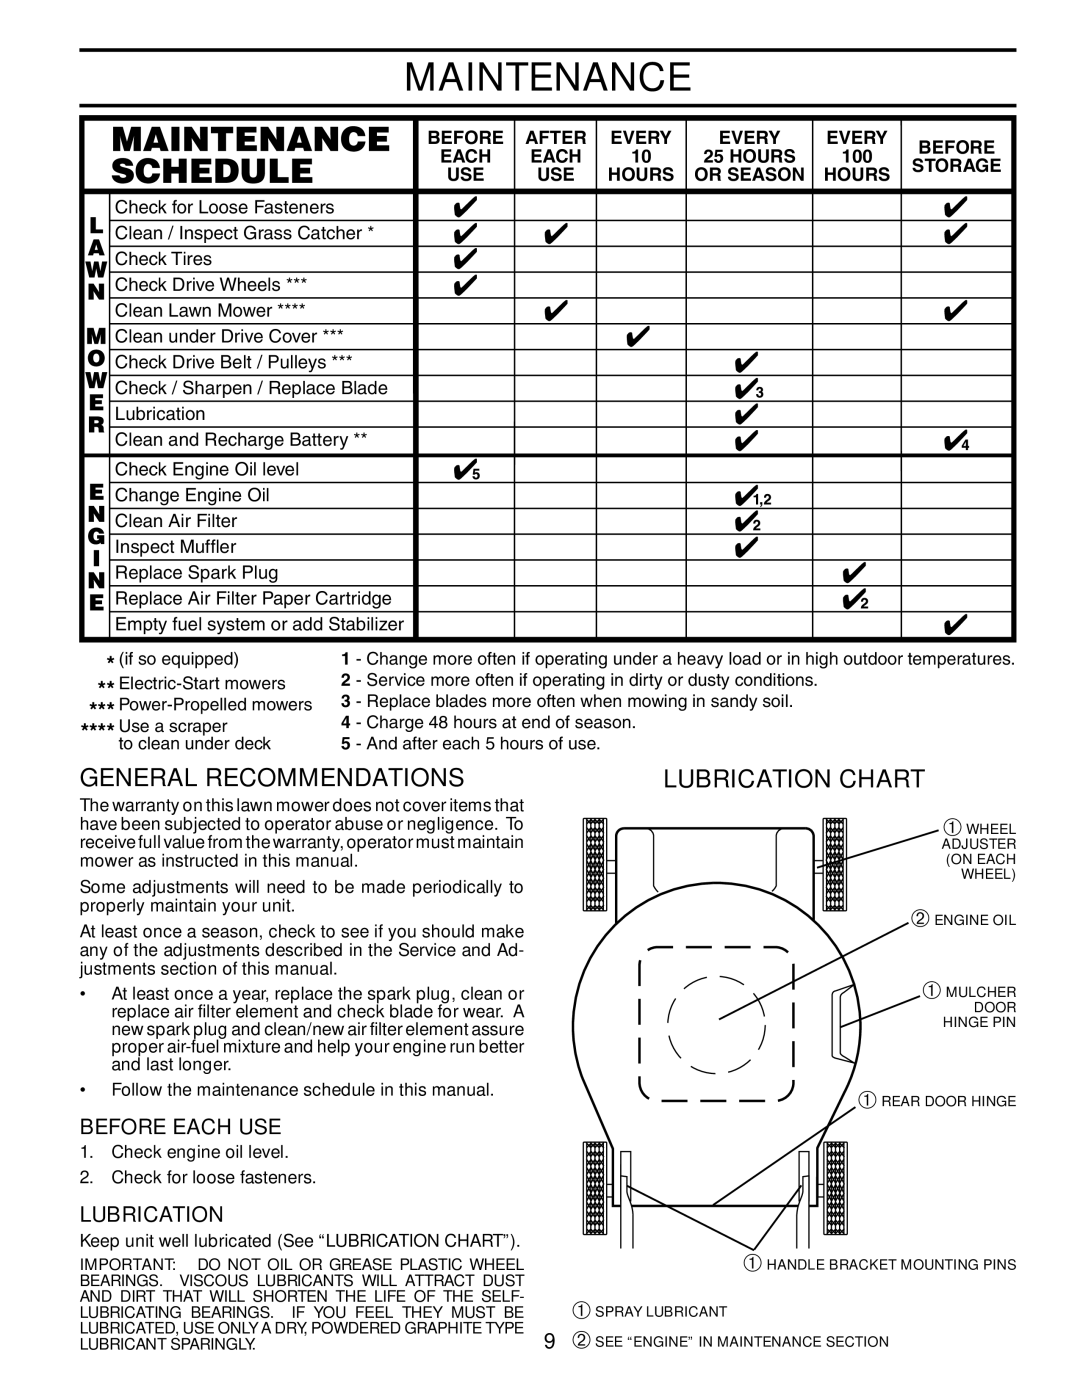 Husqvarna 62522FE Maintenance, General Recommendations, Lubrication Chart, Before Each Use, After, Every, Storage, Hours 